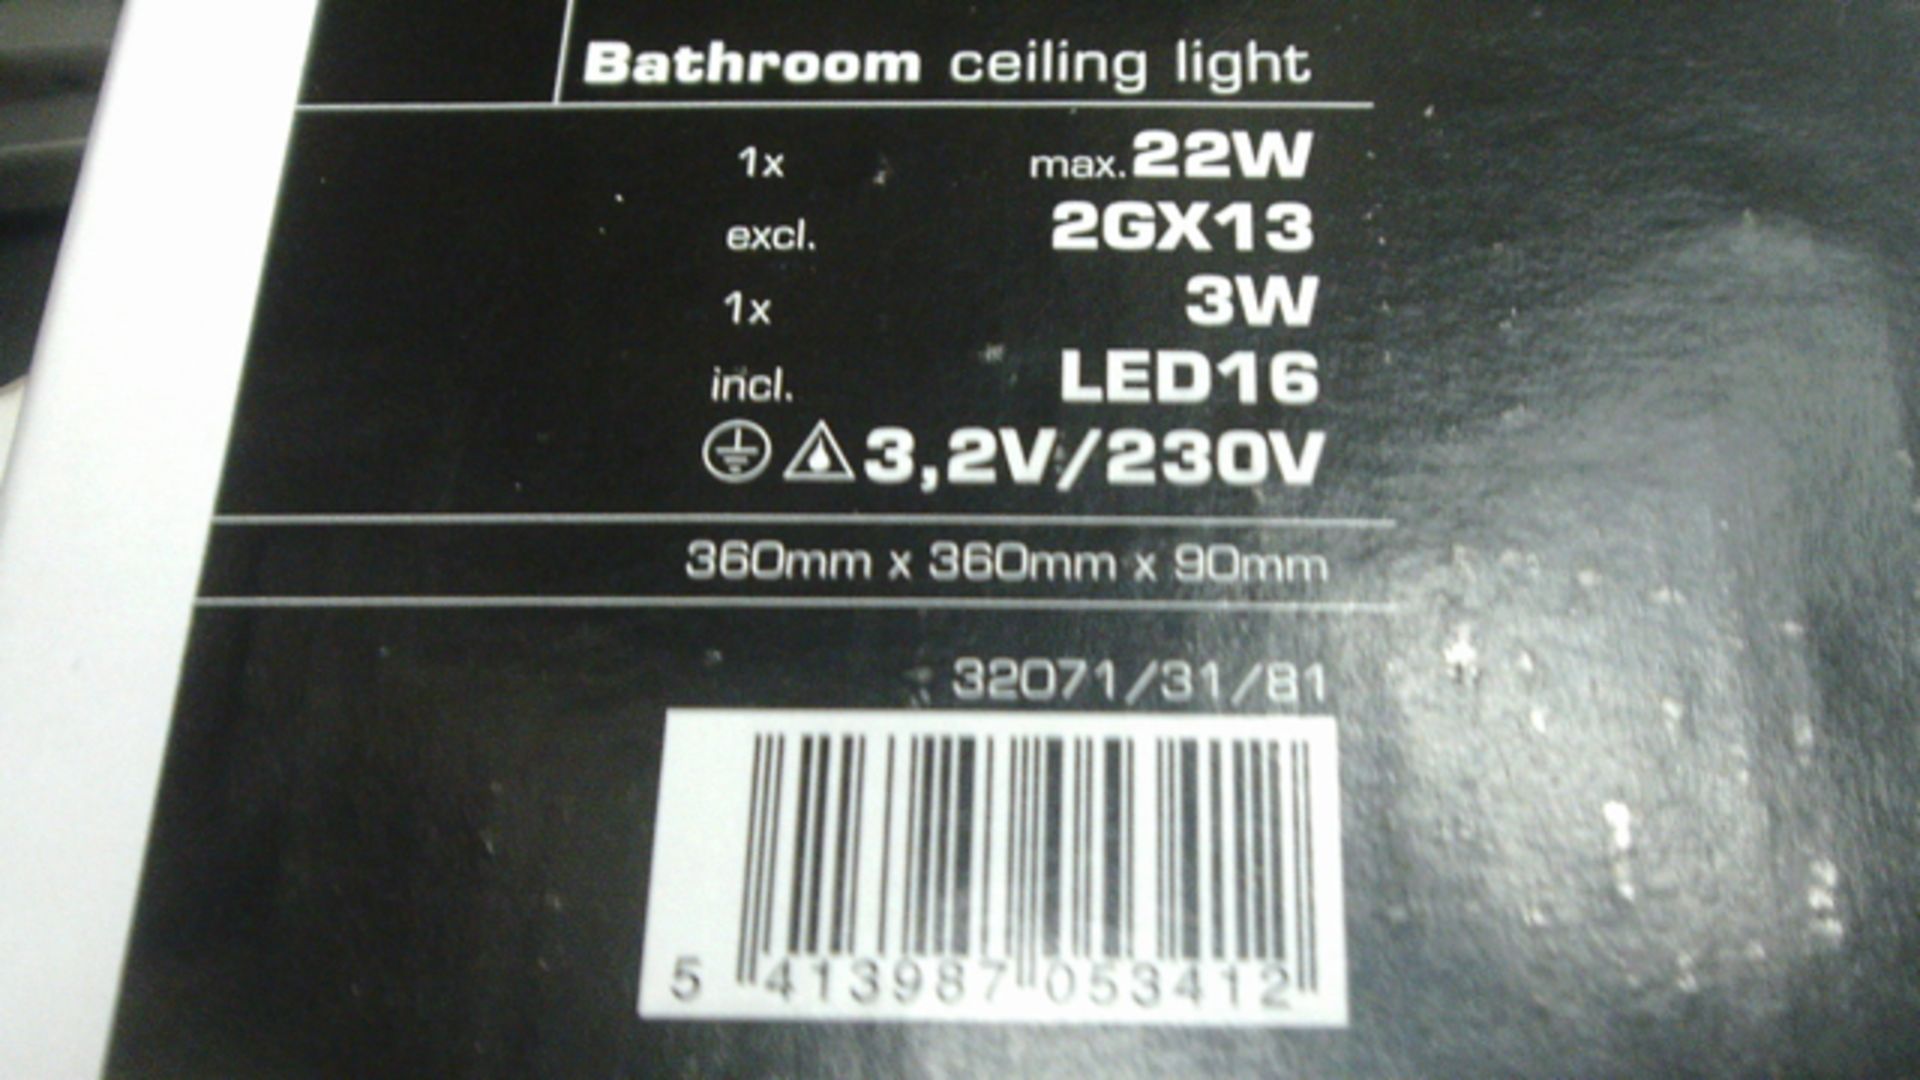 1pc x Brand new Philips Podium Houston Bathroom ceiling light - IP 44 rated includes bulb - rrp £139 - Image 3 of 3